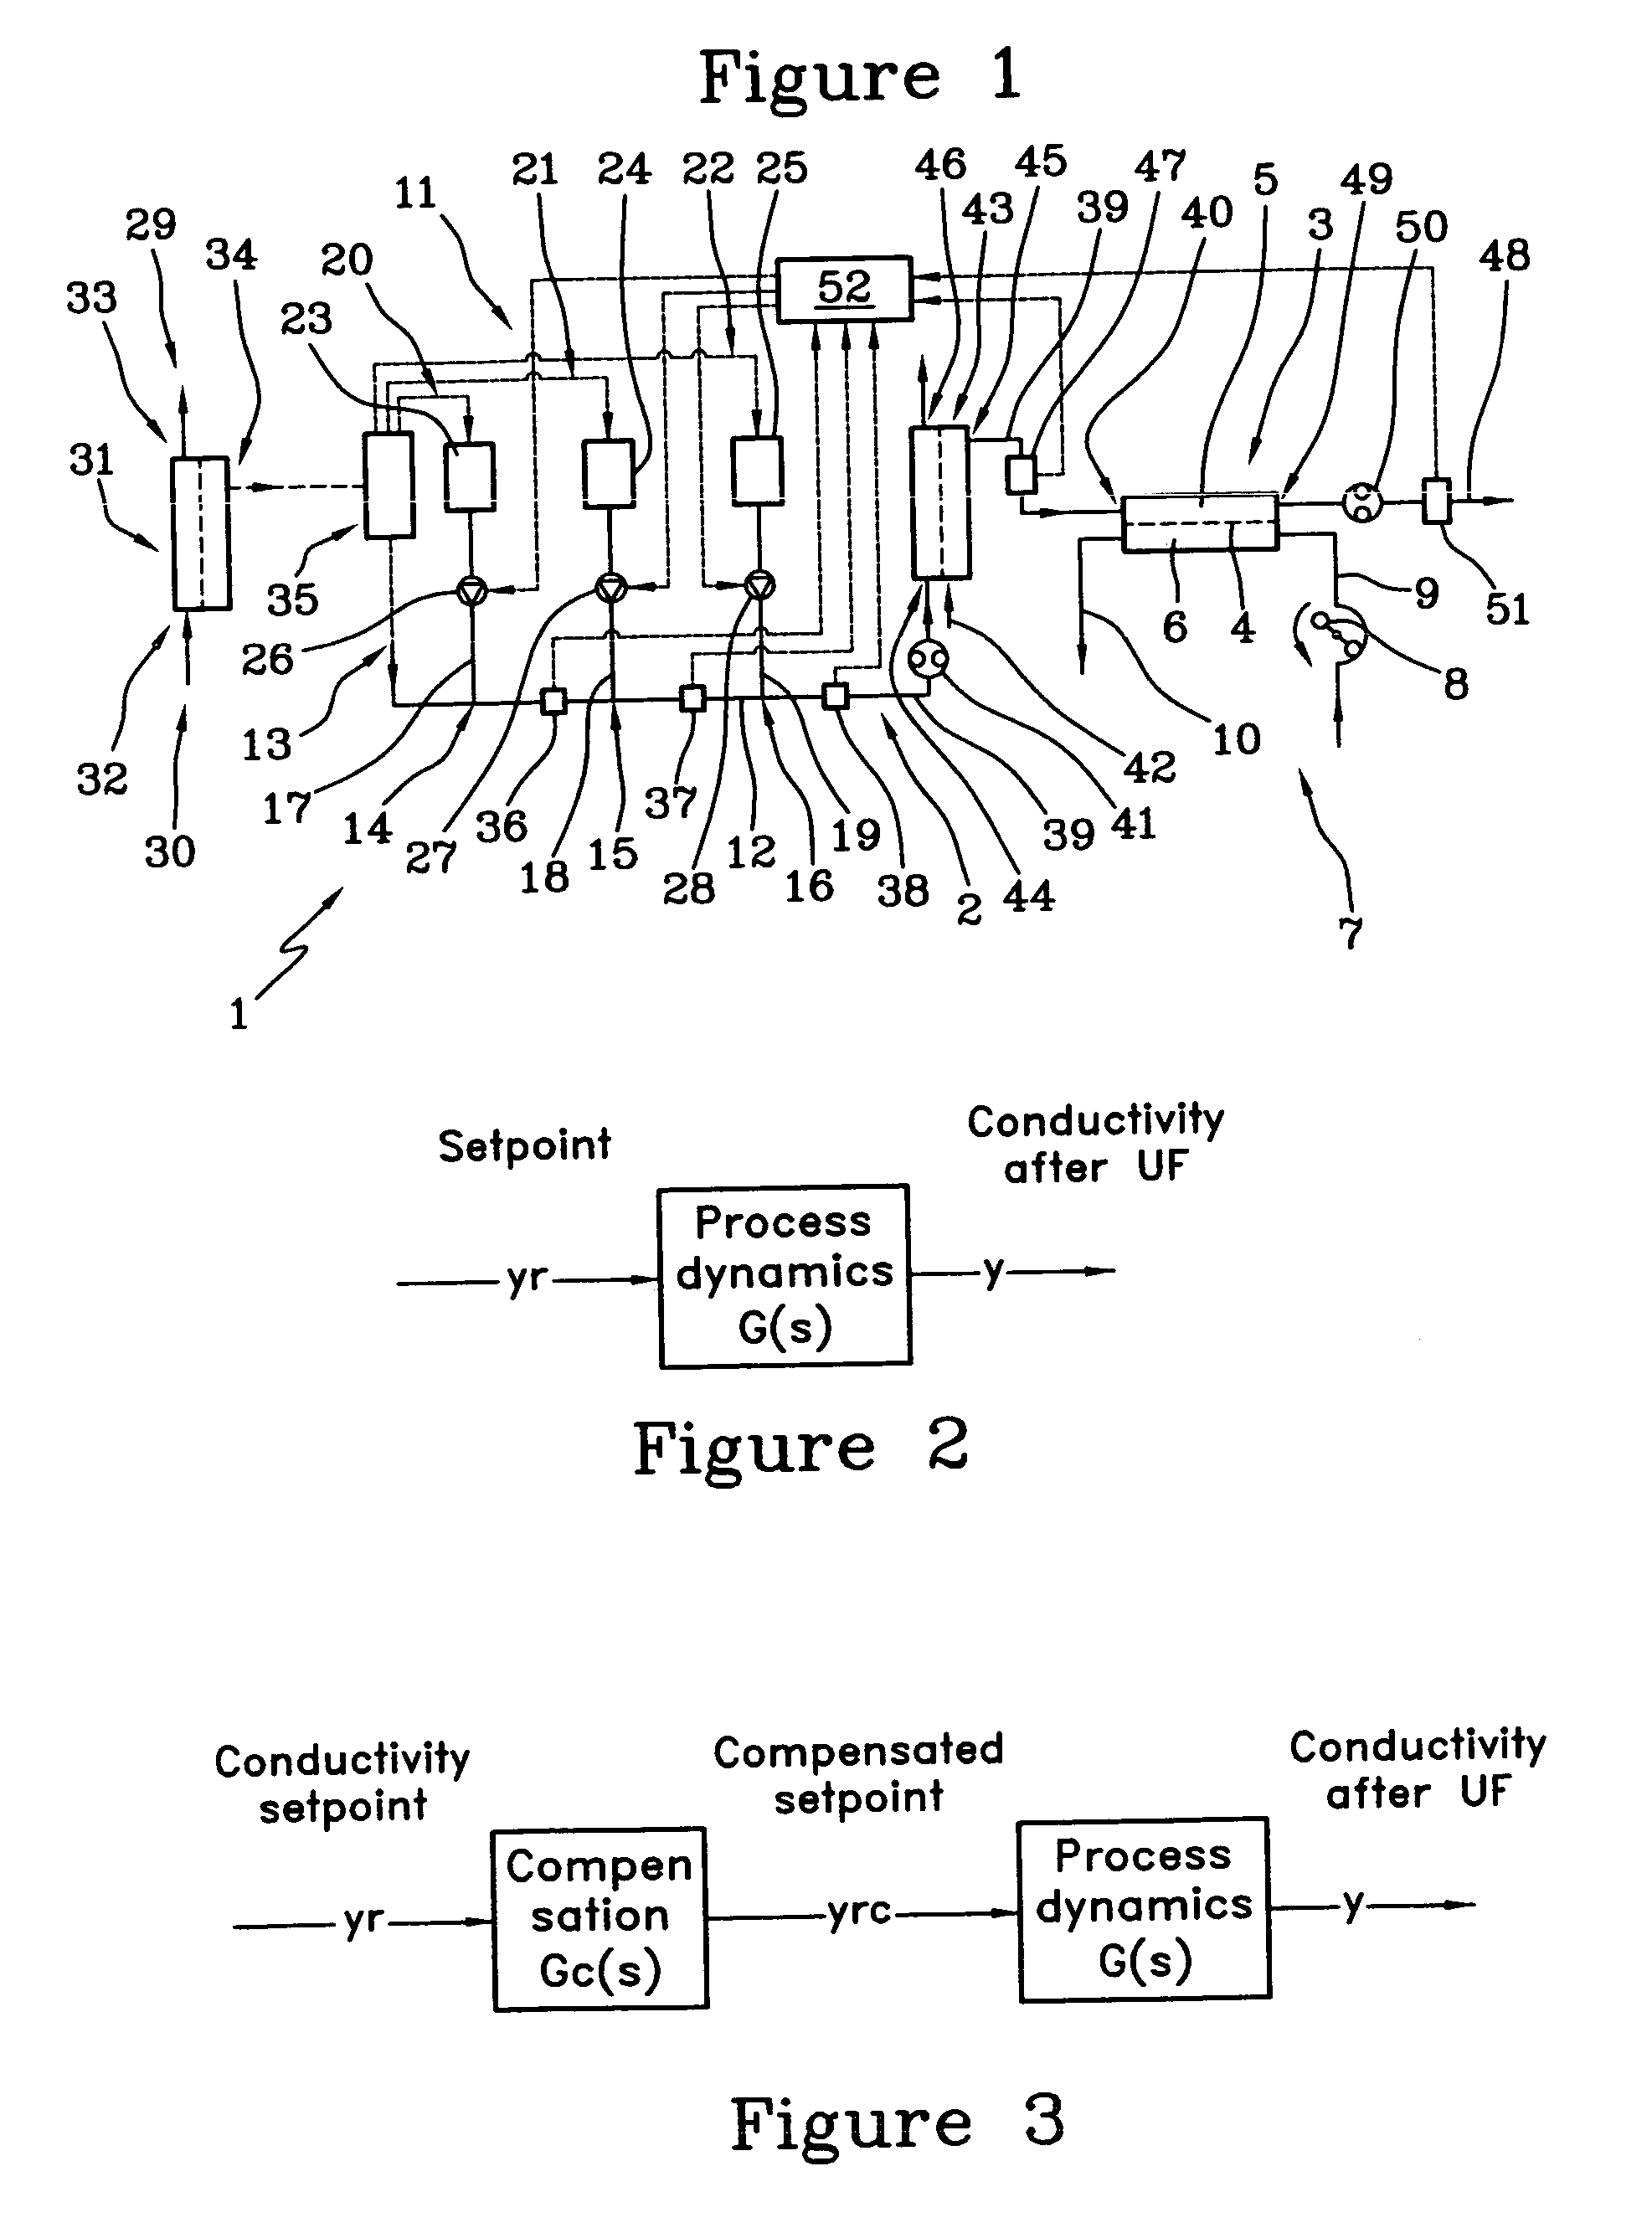 Method and apparatus for determining a patient or treatment or apparatus parameter during an extracorporeal blood treatment